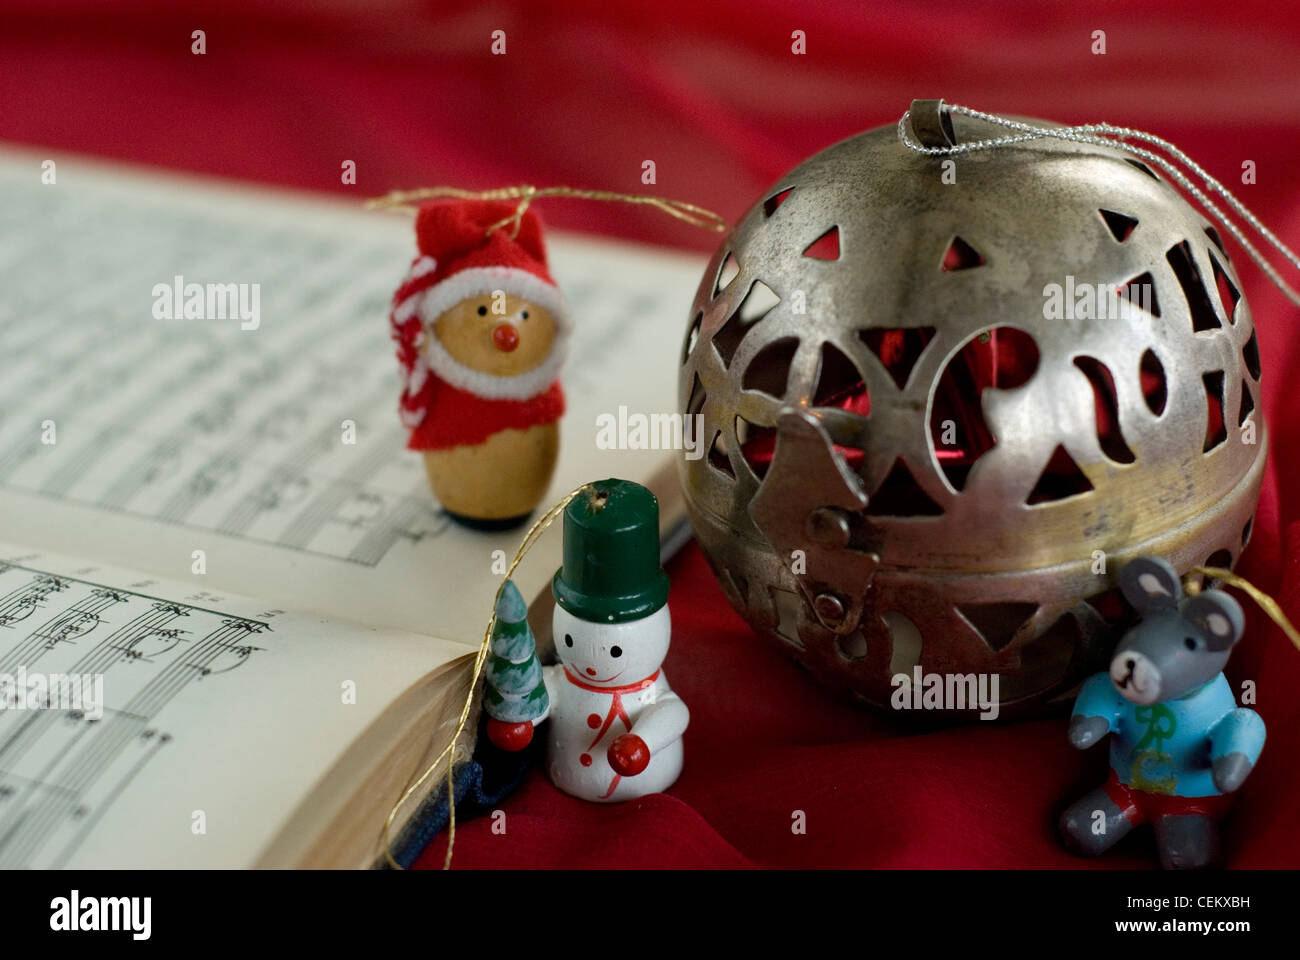 A book of sheet music christmas tree ornaments, of a father christmas, a snowman, a silver ball, and a grey mouse Sophie Stock Photo